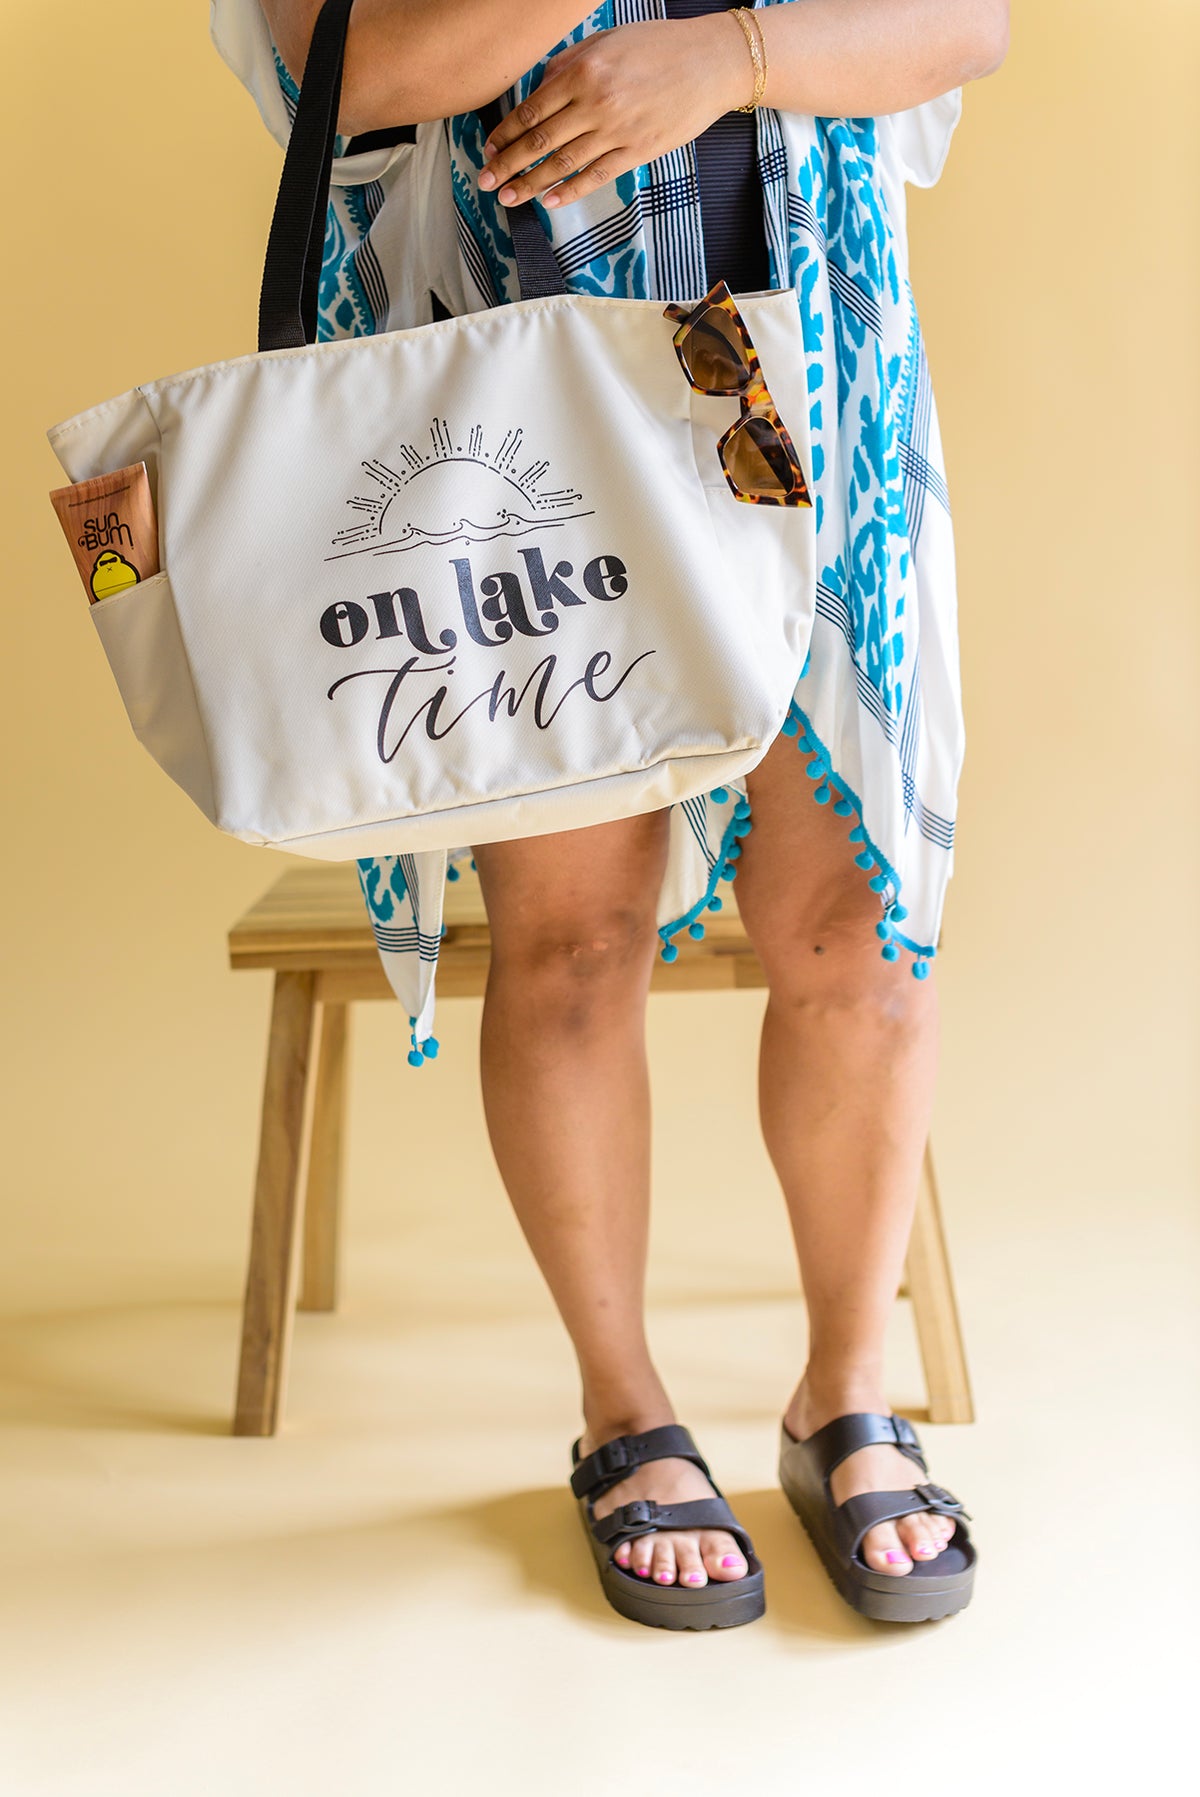 On Lake Time Zippered Tote - 3/31/2023